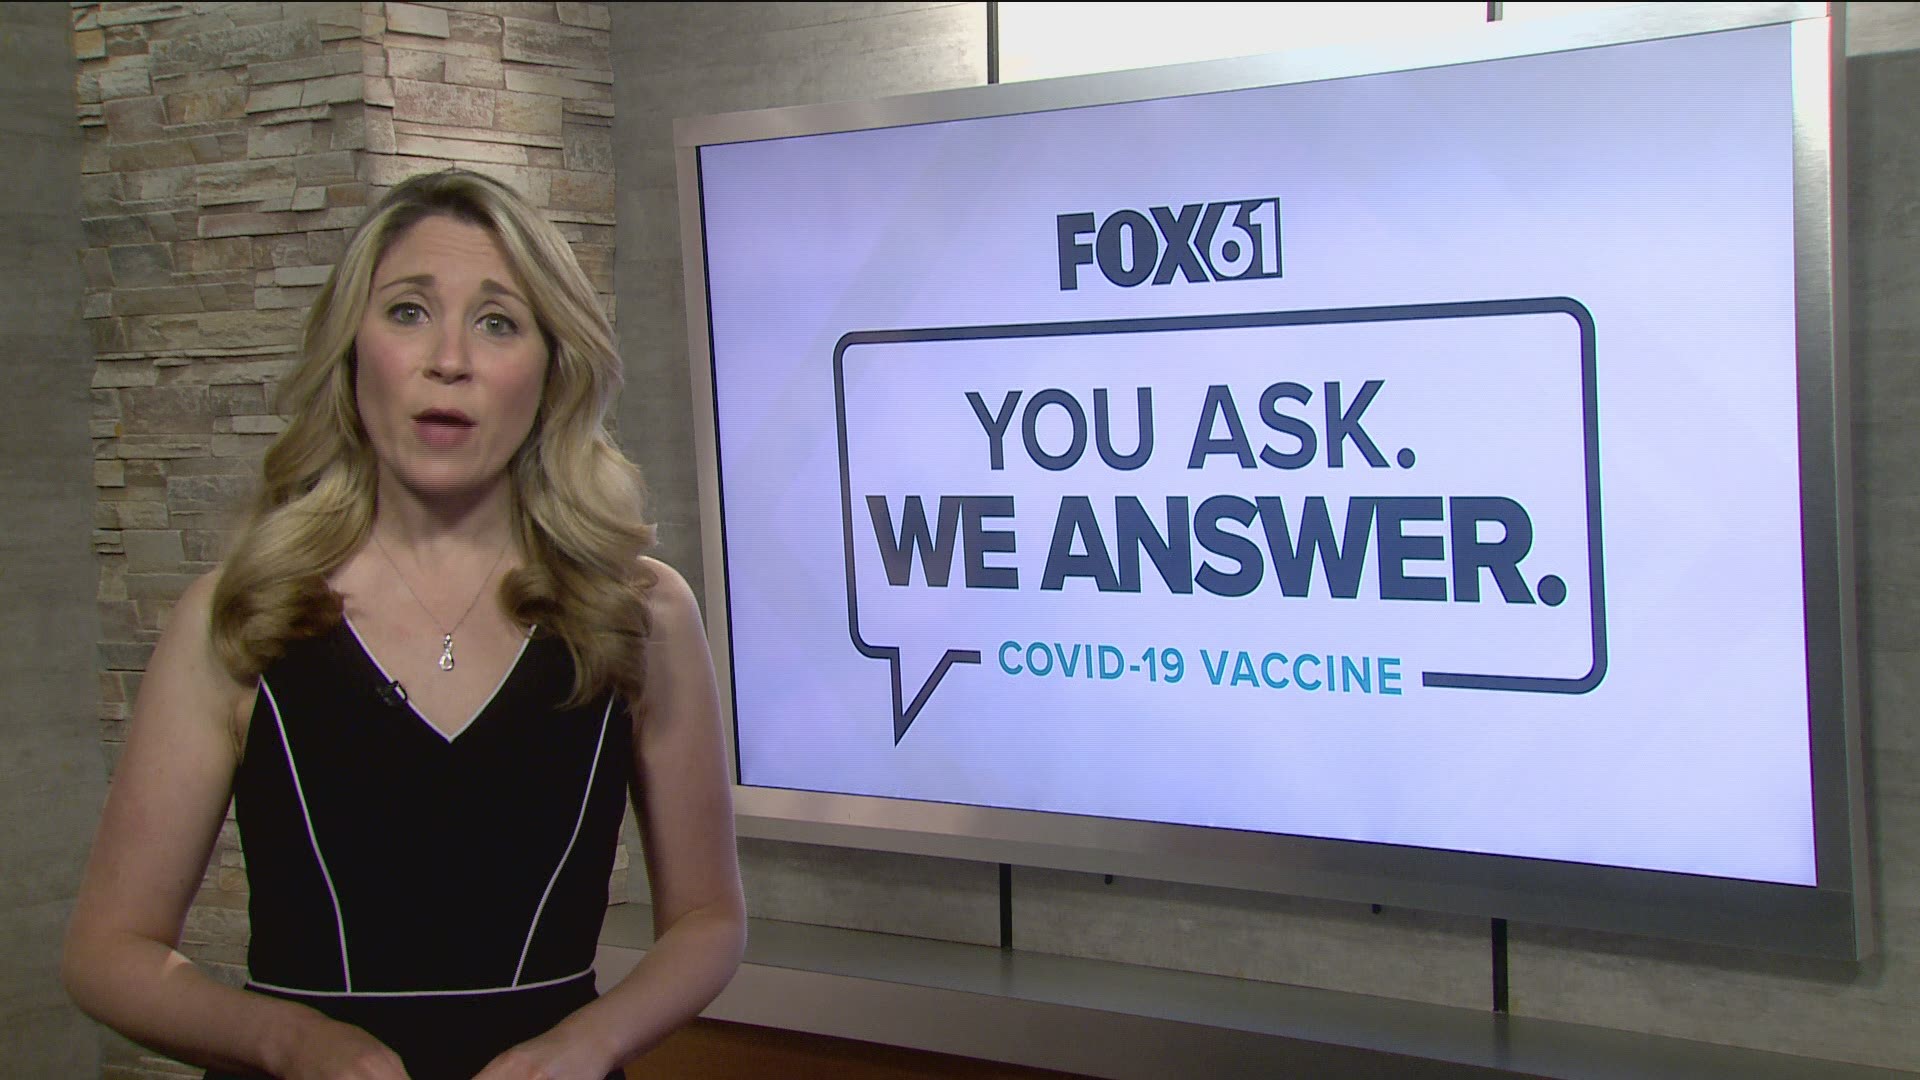 “Millions of Americans have been vaccinated. If it's safe and effective, why hasn't the FDA approved it? Not just for emergency use?”